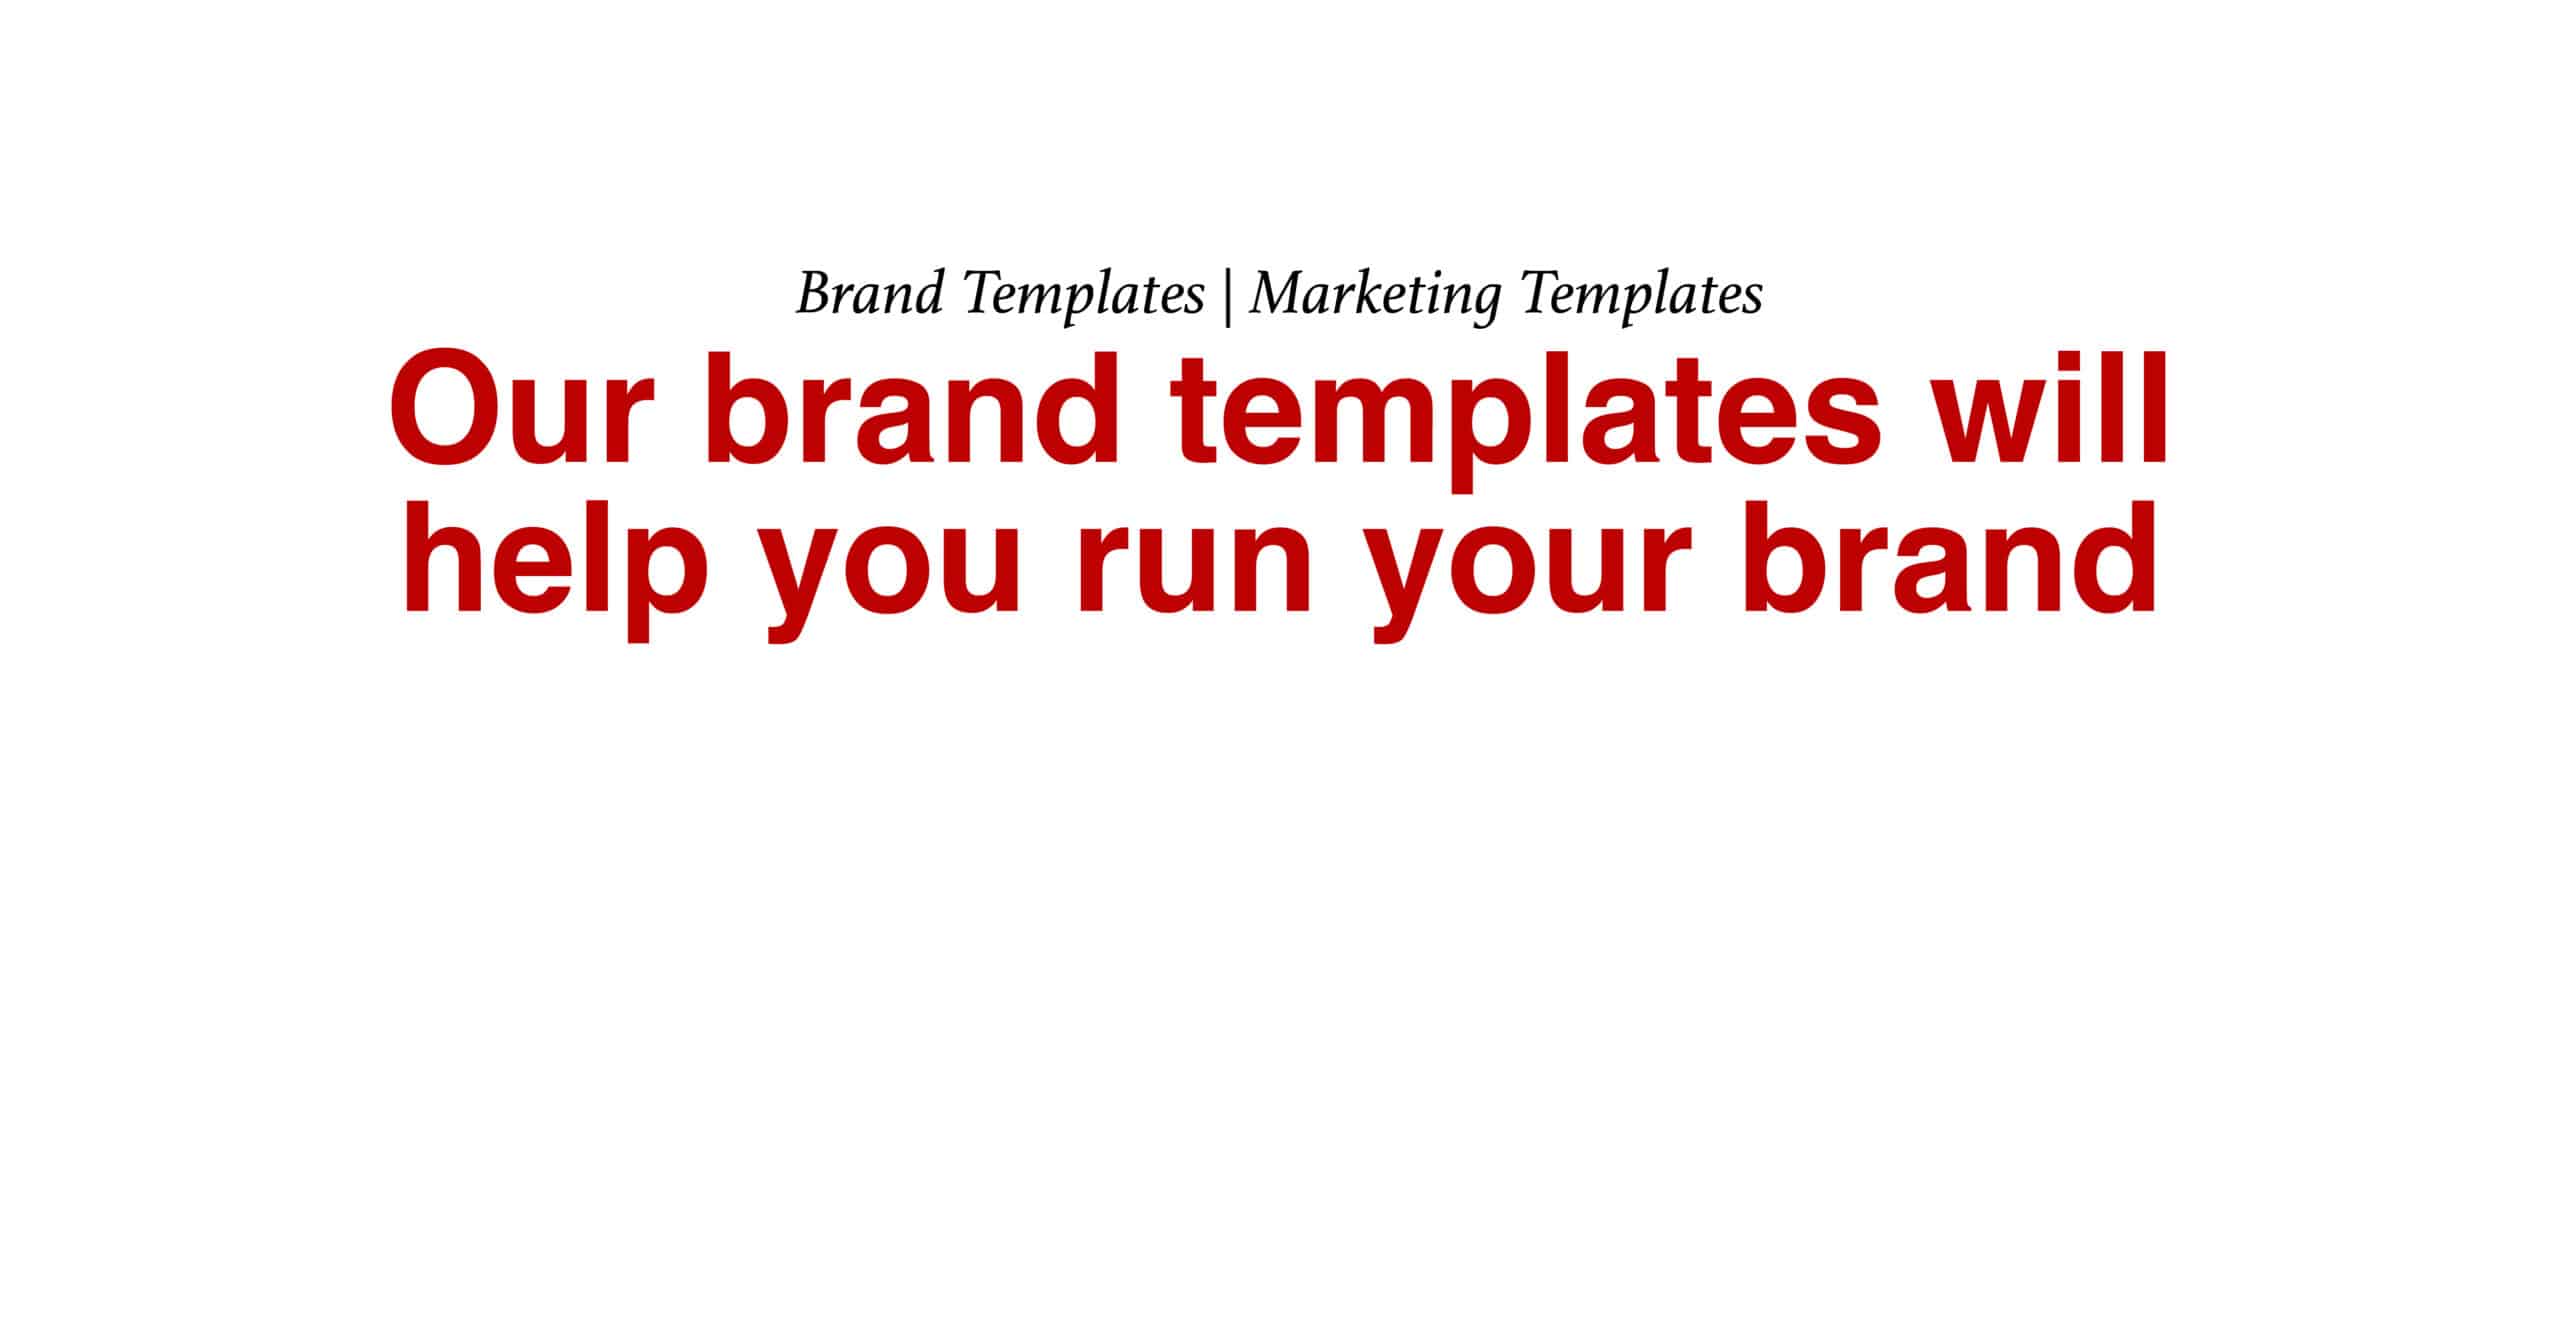 Brand Templates and Marketing Templates